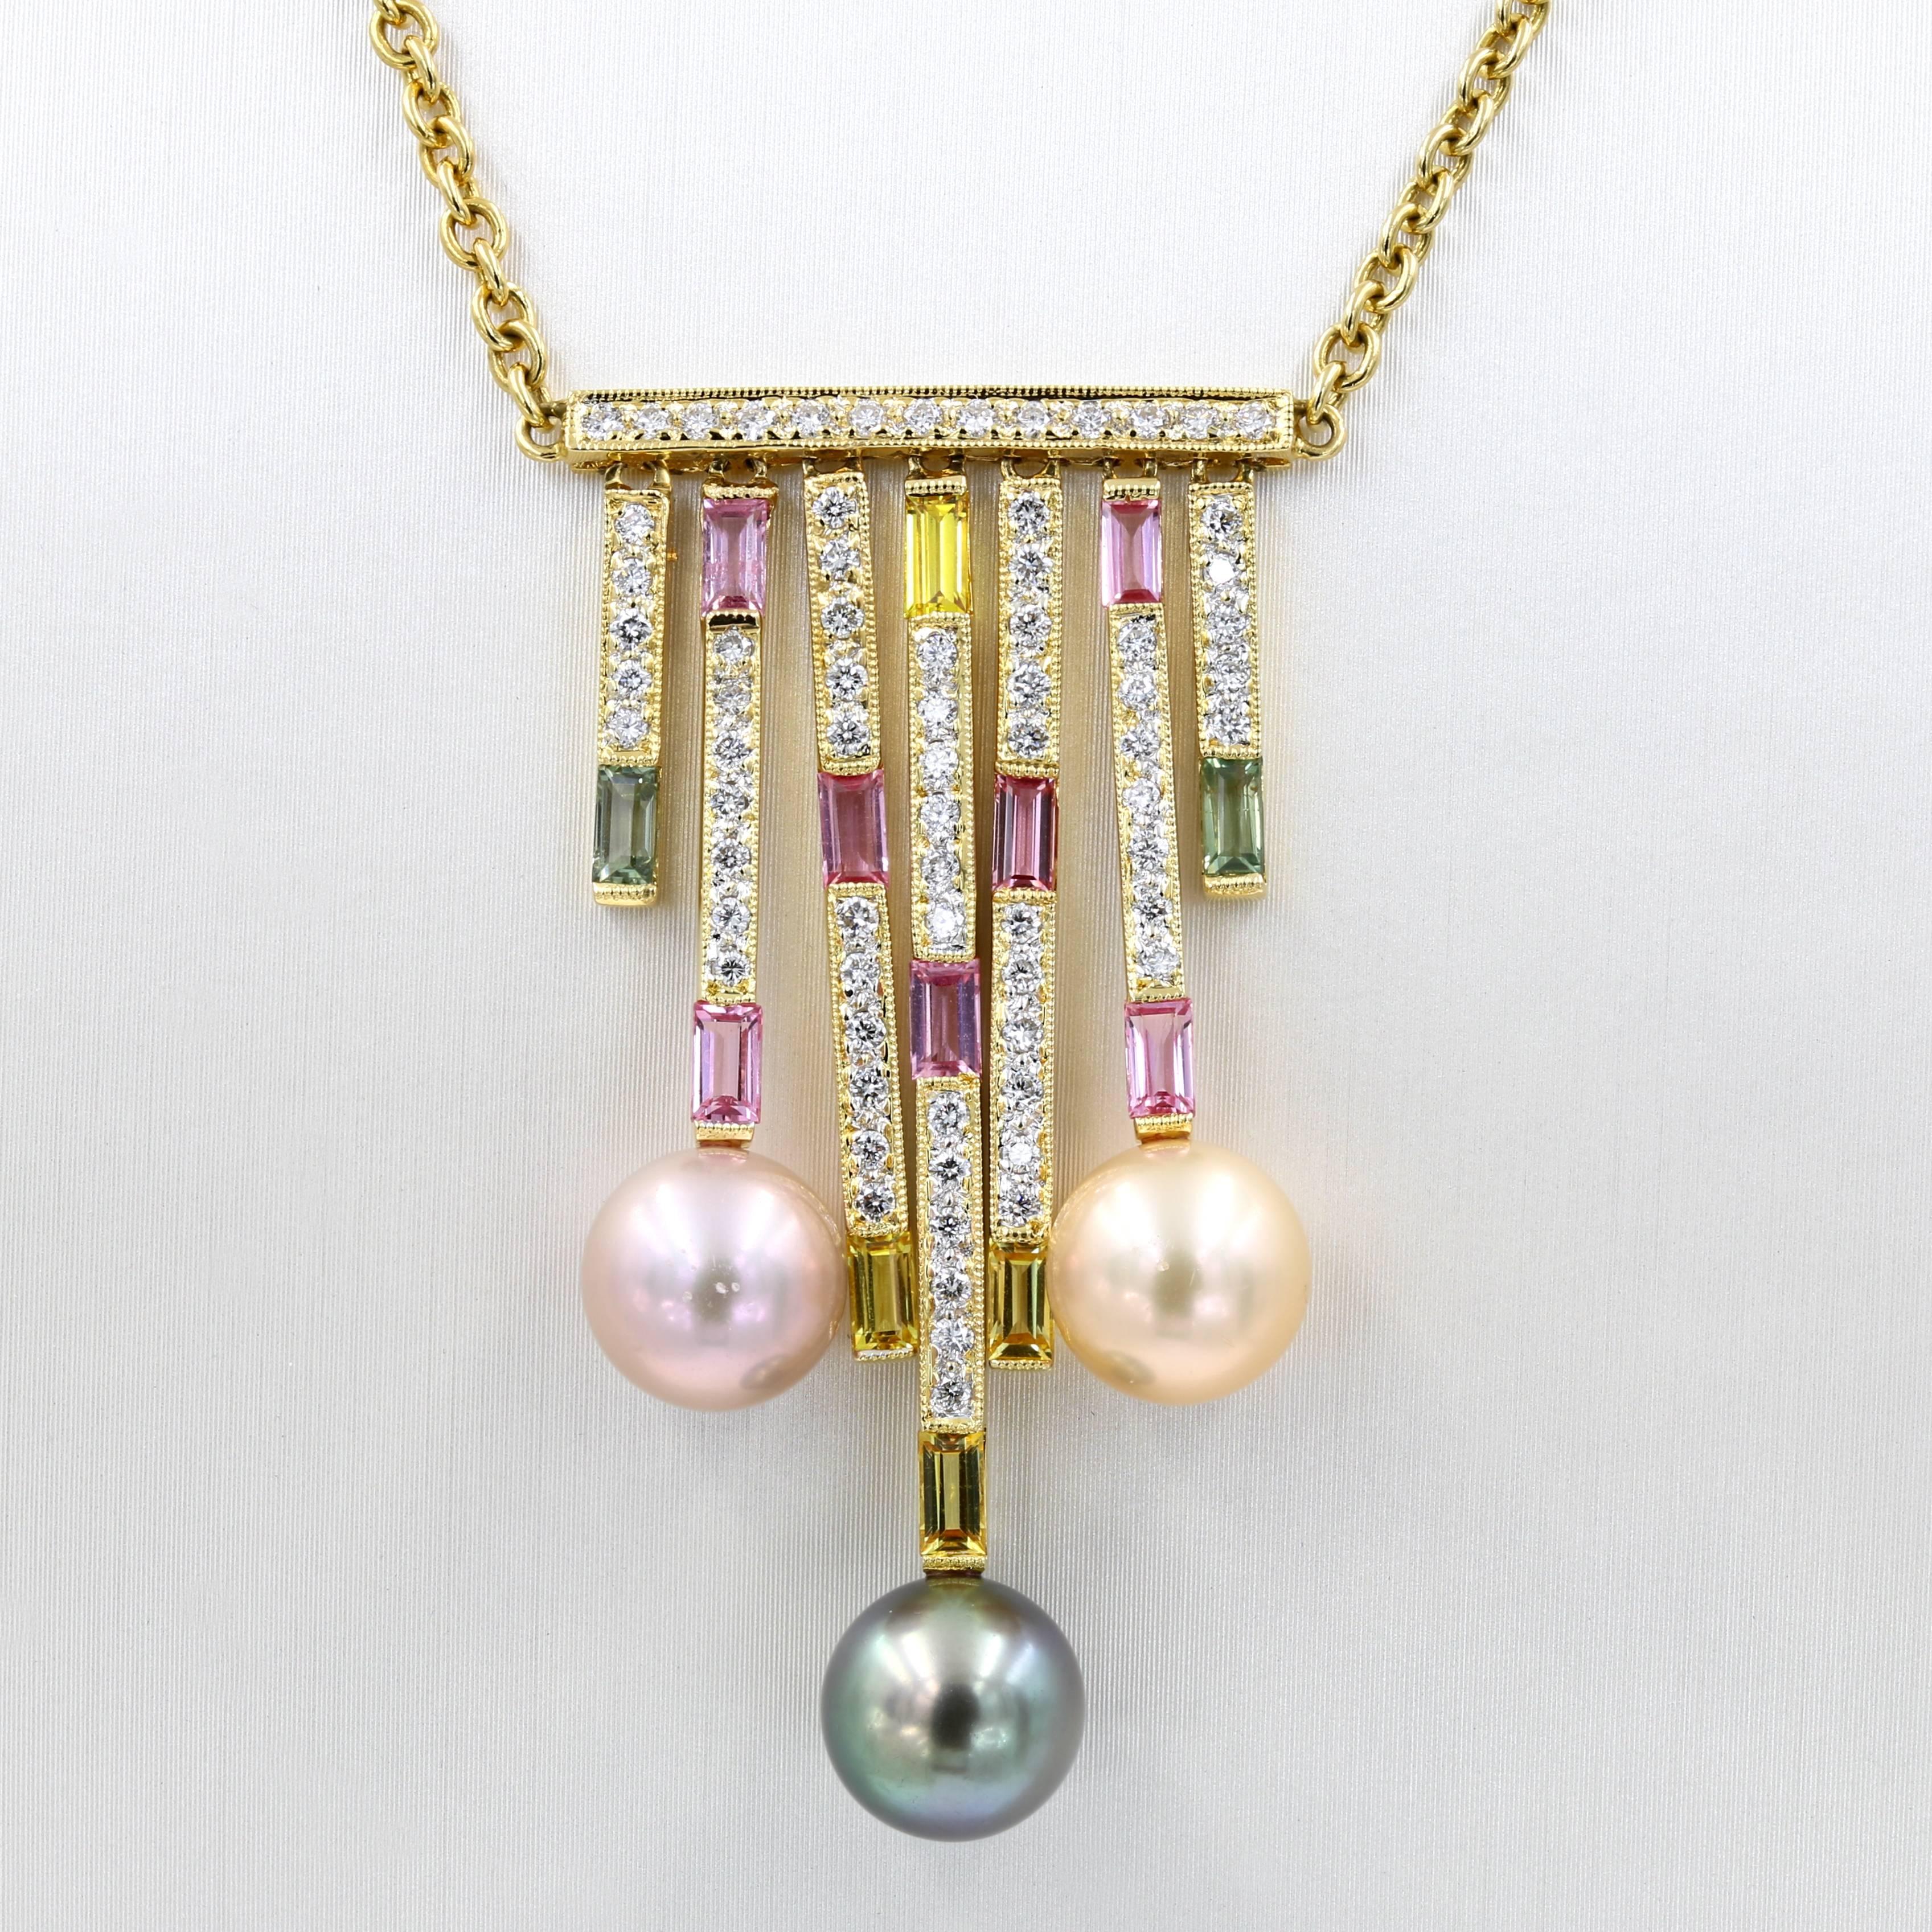 This unique necklace in 18kt. yellow gold has three 9mm freshwater pearls (1 tan, 1 cream, and 1 pink) which dangle from white diamond and multicolored sapphire sections. The pieces contains 71 rounds diamonds=.72ct. t.w. There are 21 natural